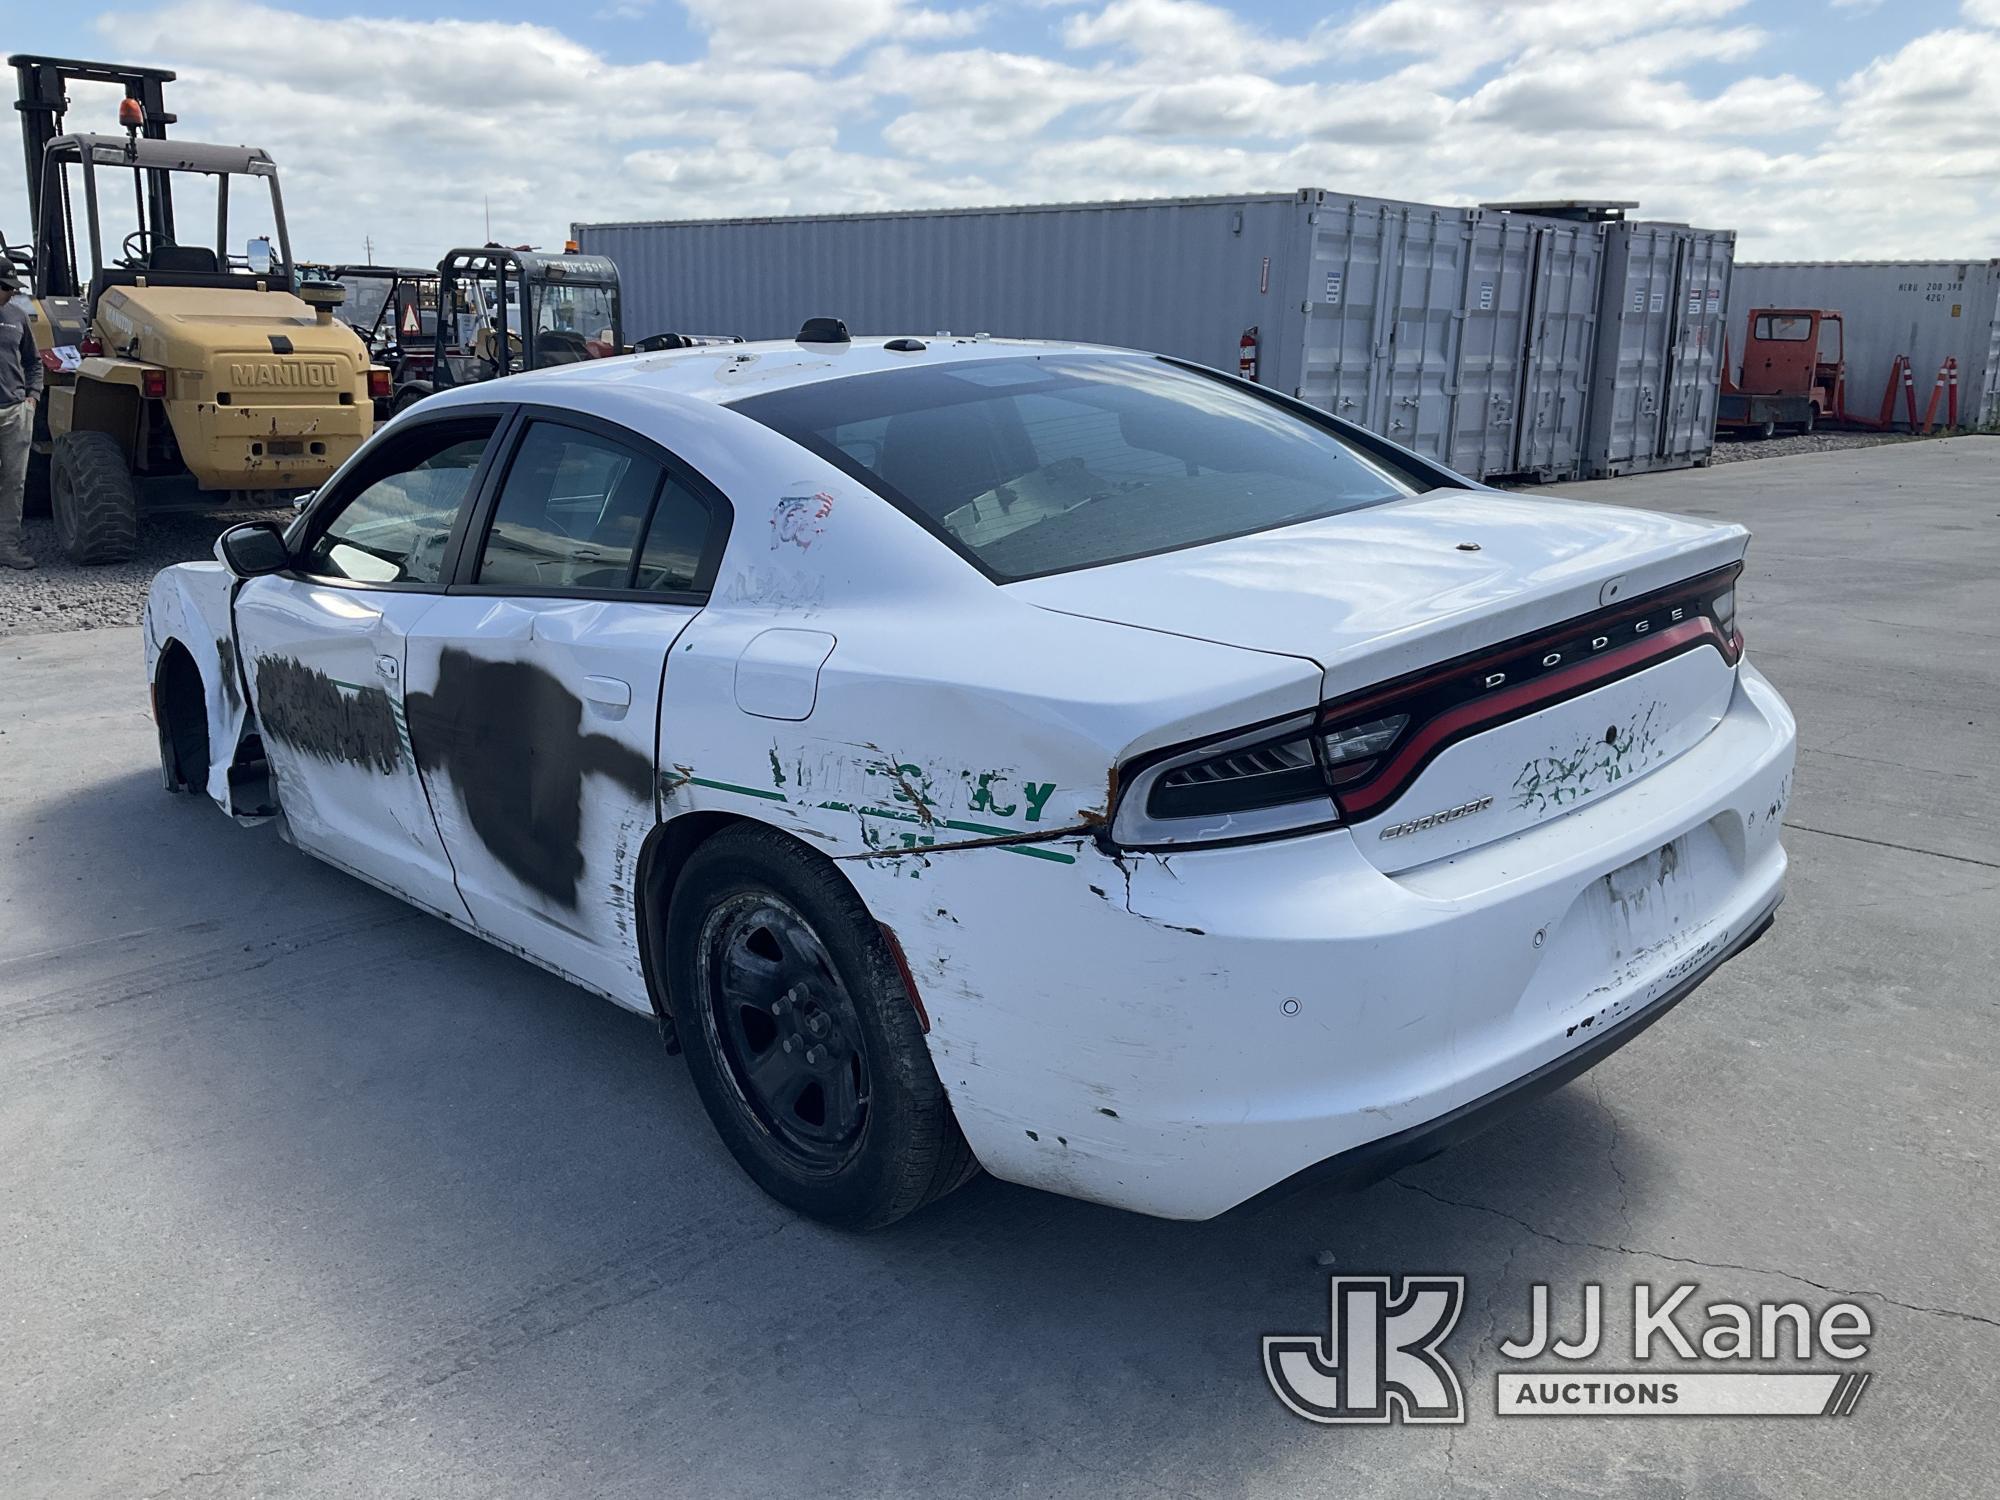 (Dixon, CA) 2019 Dodge Charger 4-Door Sedan Runs, Does Not Move, (1) Recall With Remedy Not Yet Avai